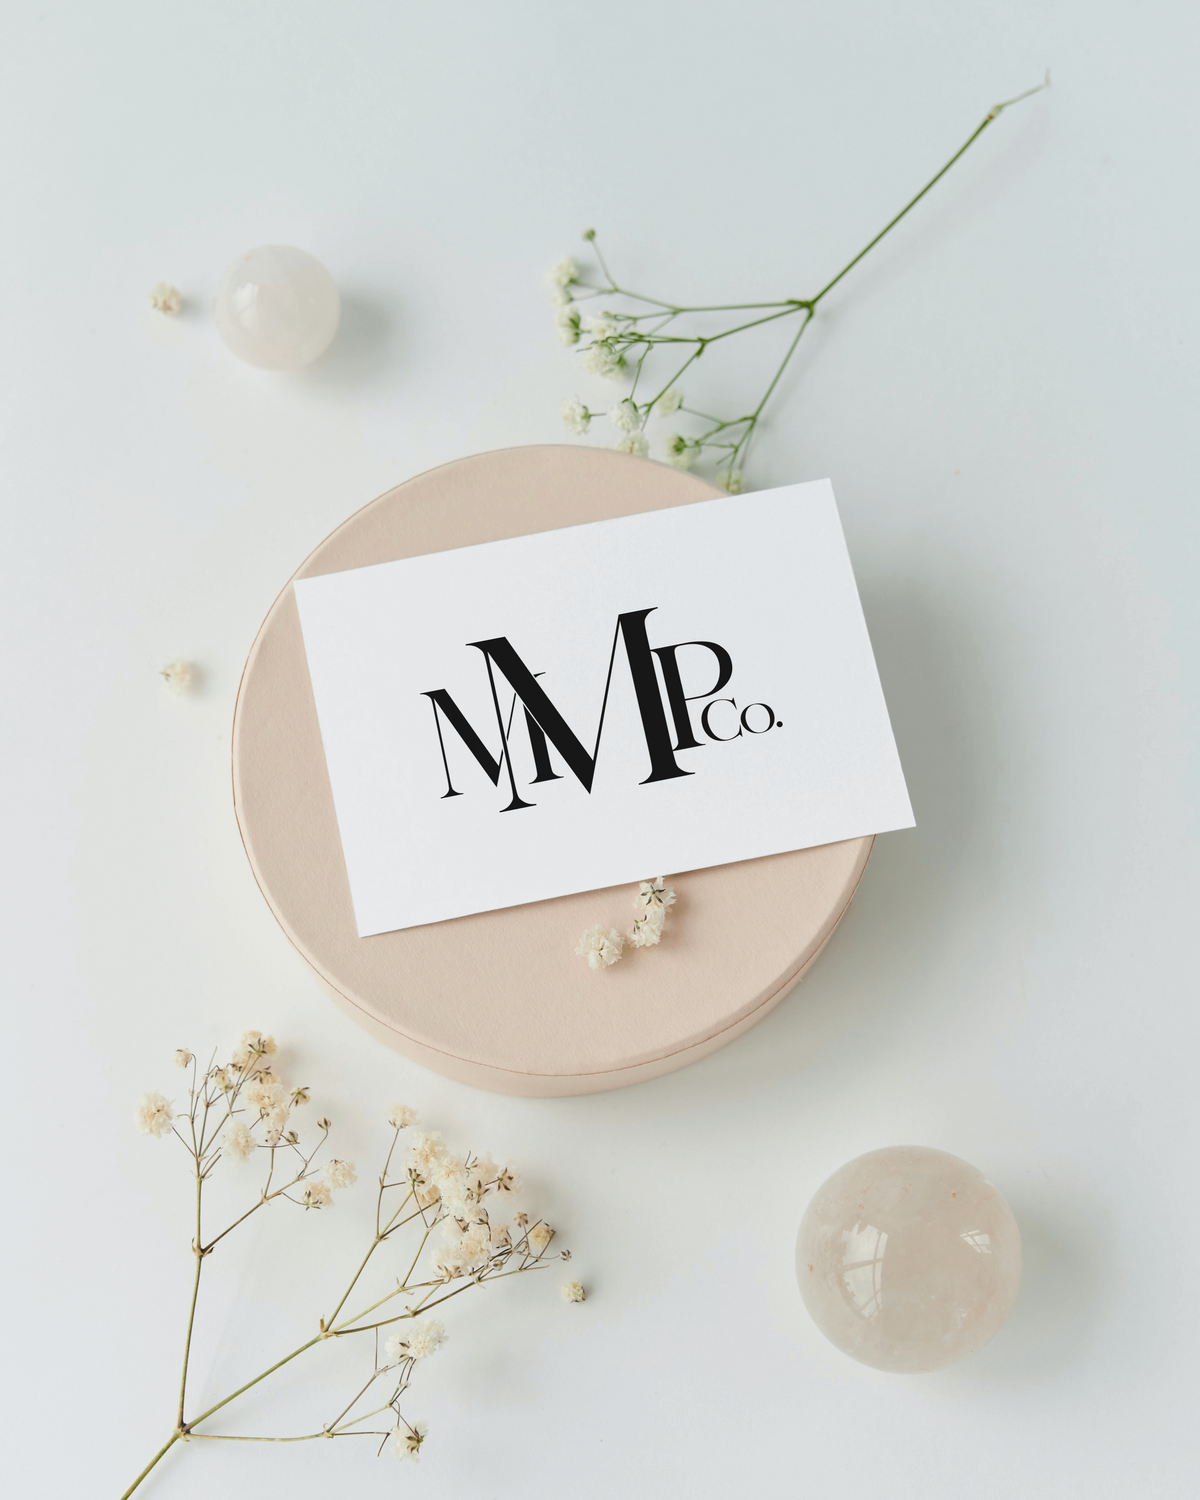 A brand logo for a photographer MMPCo. sits on a paper with florals and stationary